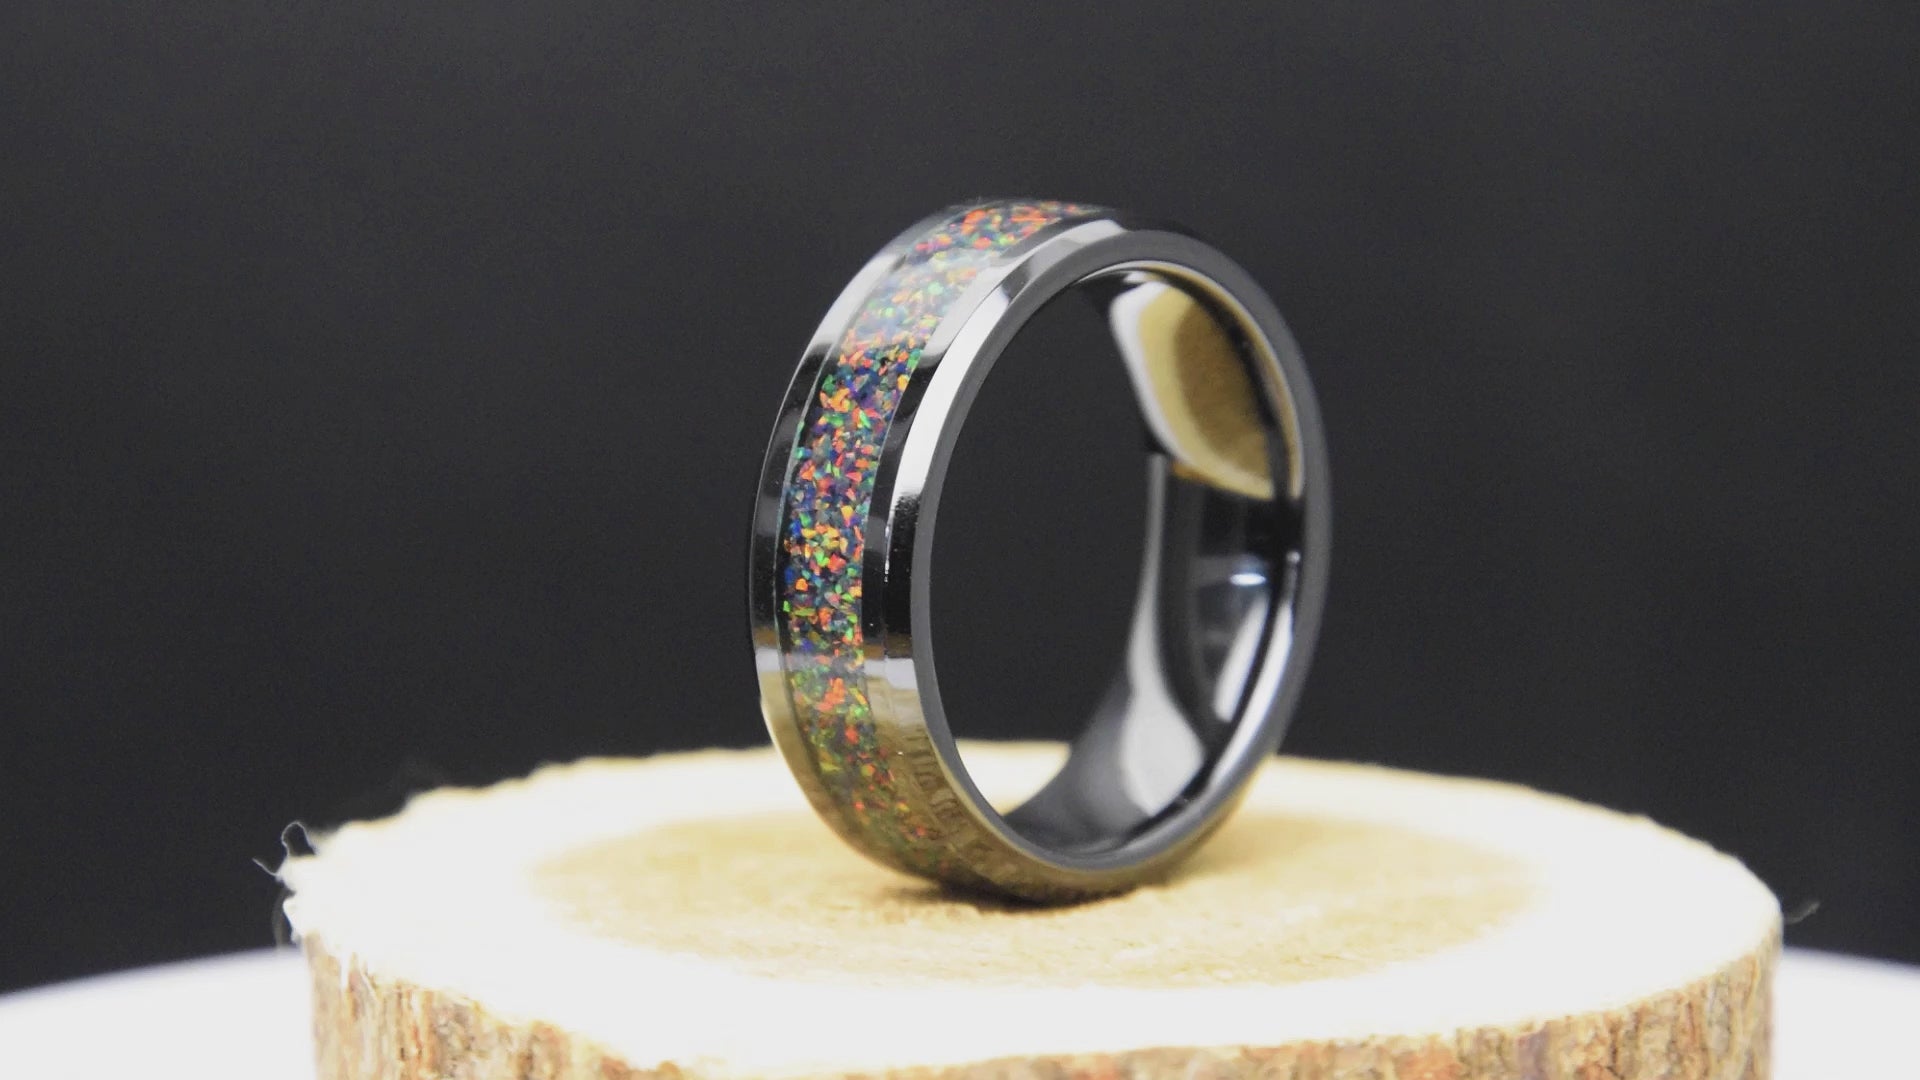 His And Hers Black Fire Opal Wedding Band Set Black Ceramic